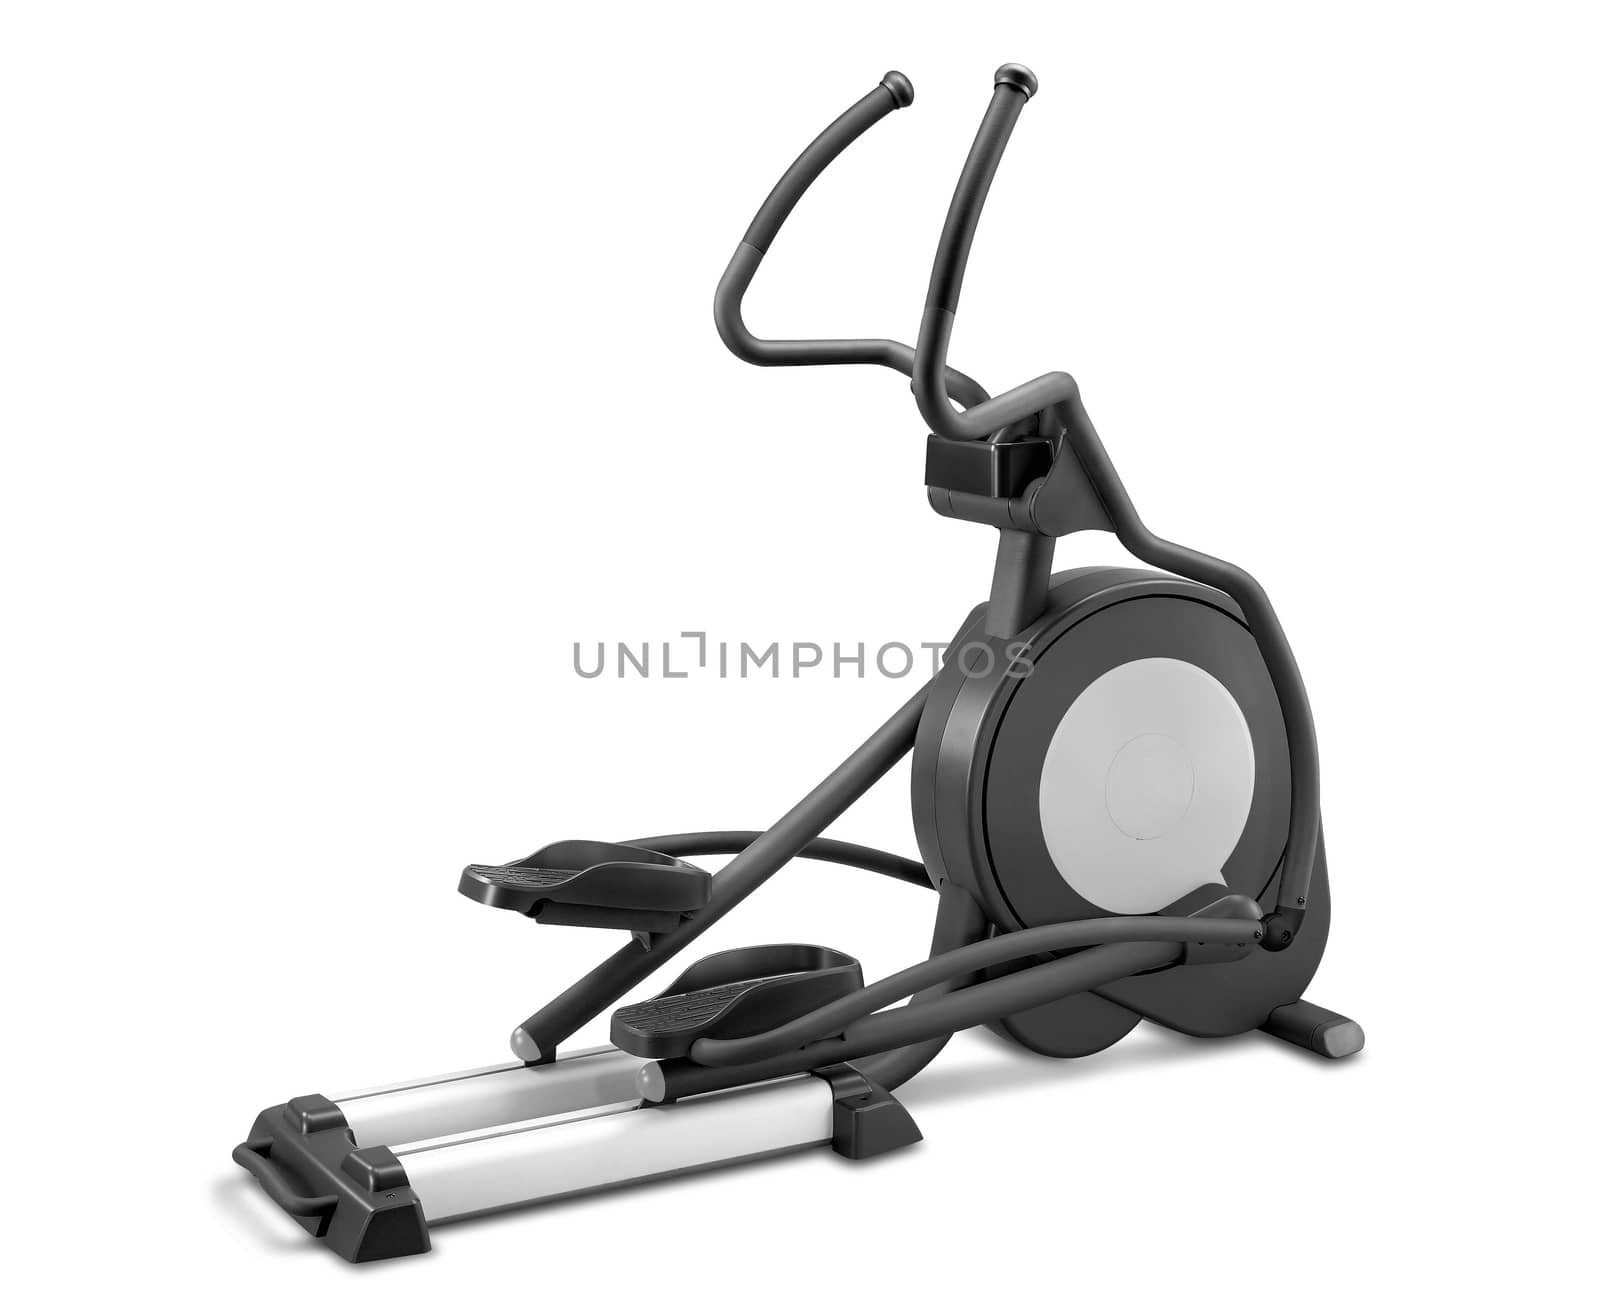 ski simulator isolated on a white background by ozaiachin